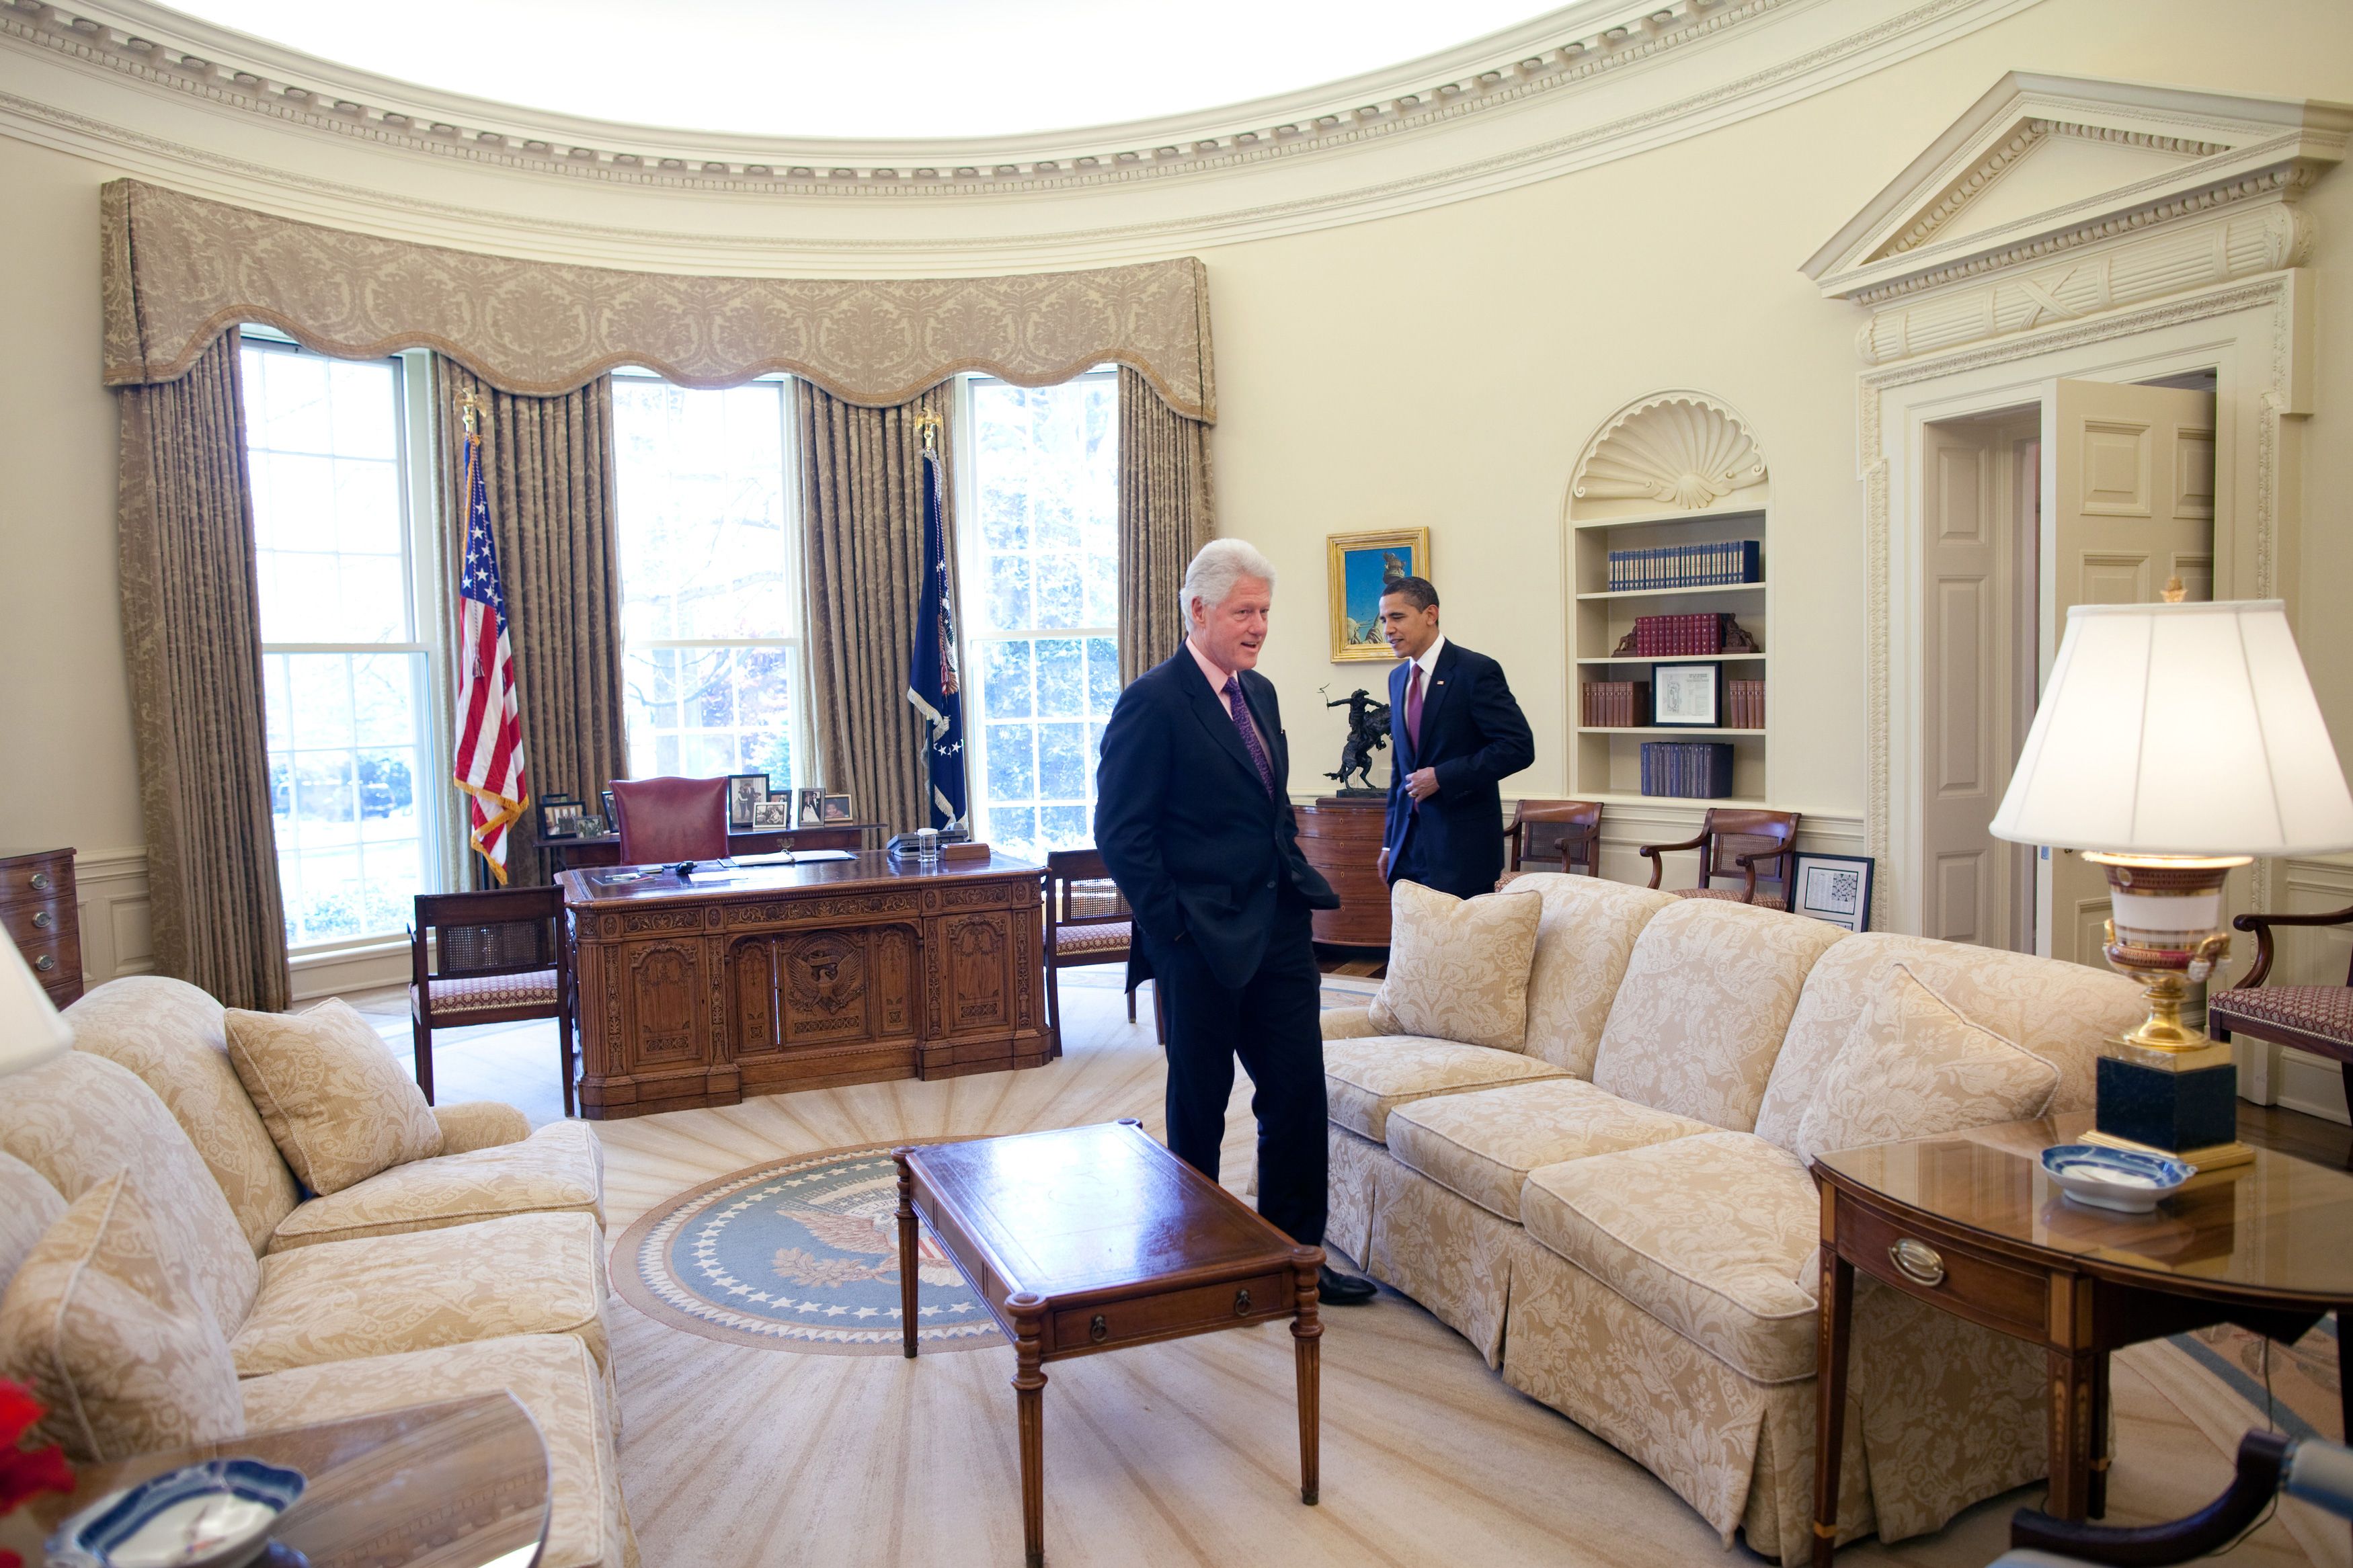 Barack Obama And Bill Clinton In The Oval Office HD Wallpaper